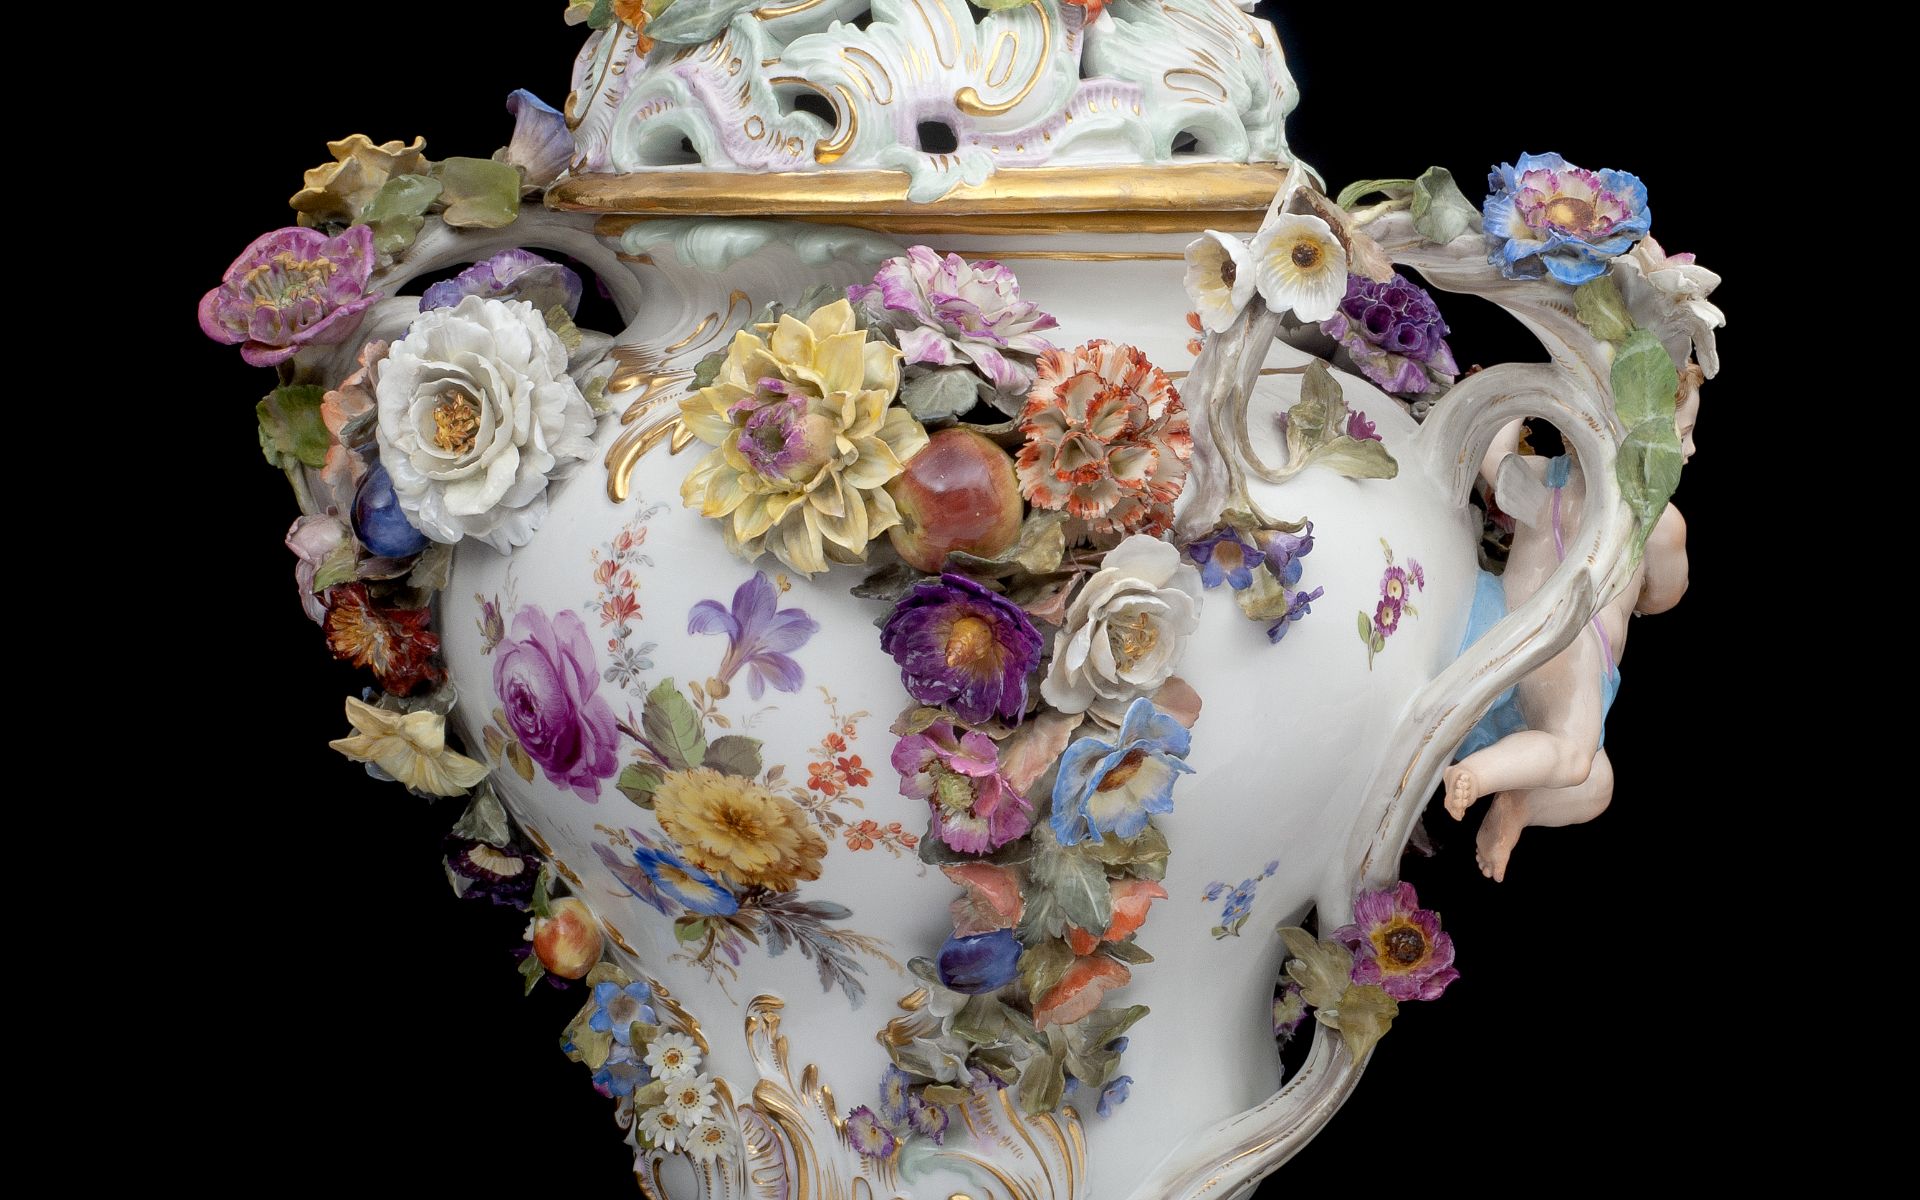 A FINE MONUMENTAL FLOWER ENCRUSTED MEISSEN VASE AND COVER, LATE 19TH / EARLY 20TH CENTURY - Bild 10 aus 10